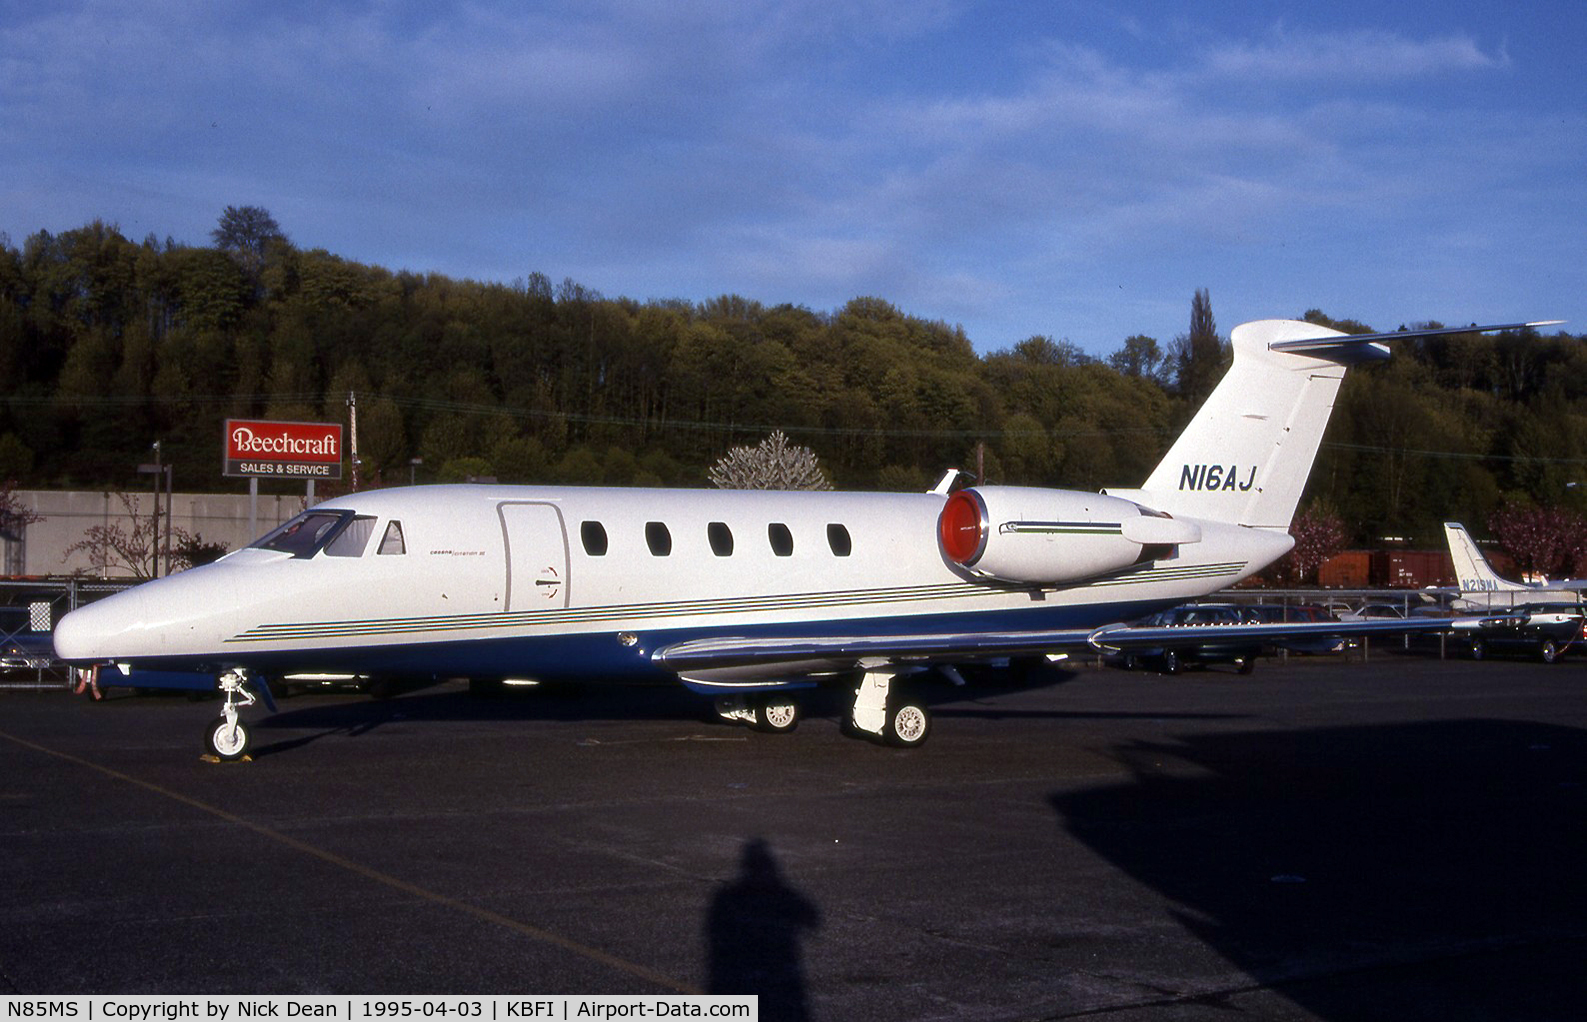 N85MS, 1985 Cessna 650 C/N 650-0075, KBFI (Seen here as N16AJ this aircraft id currently registered N85MS as posted)